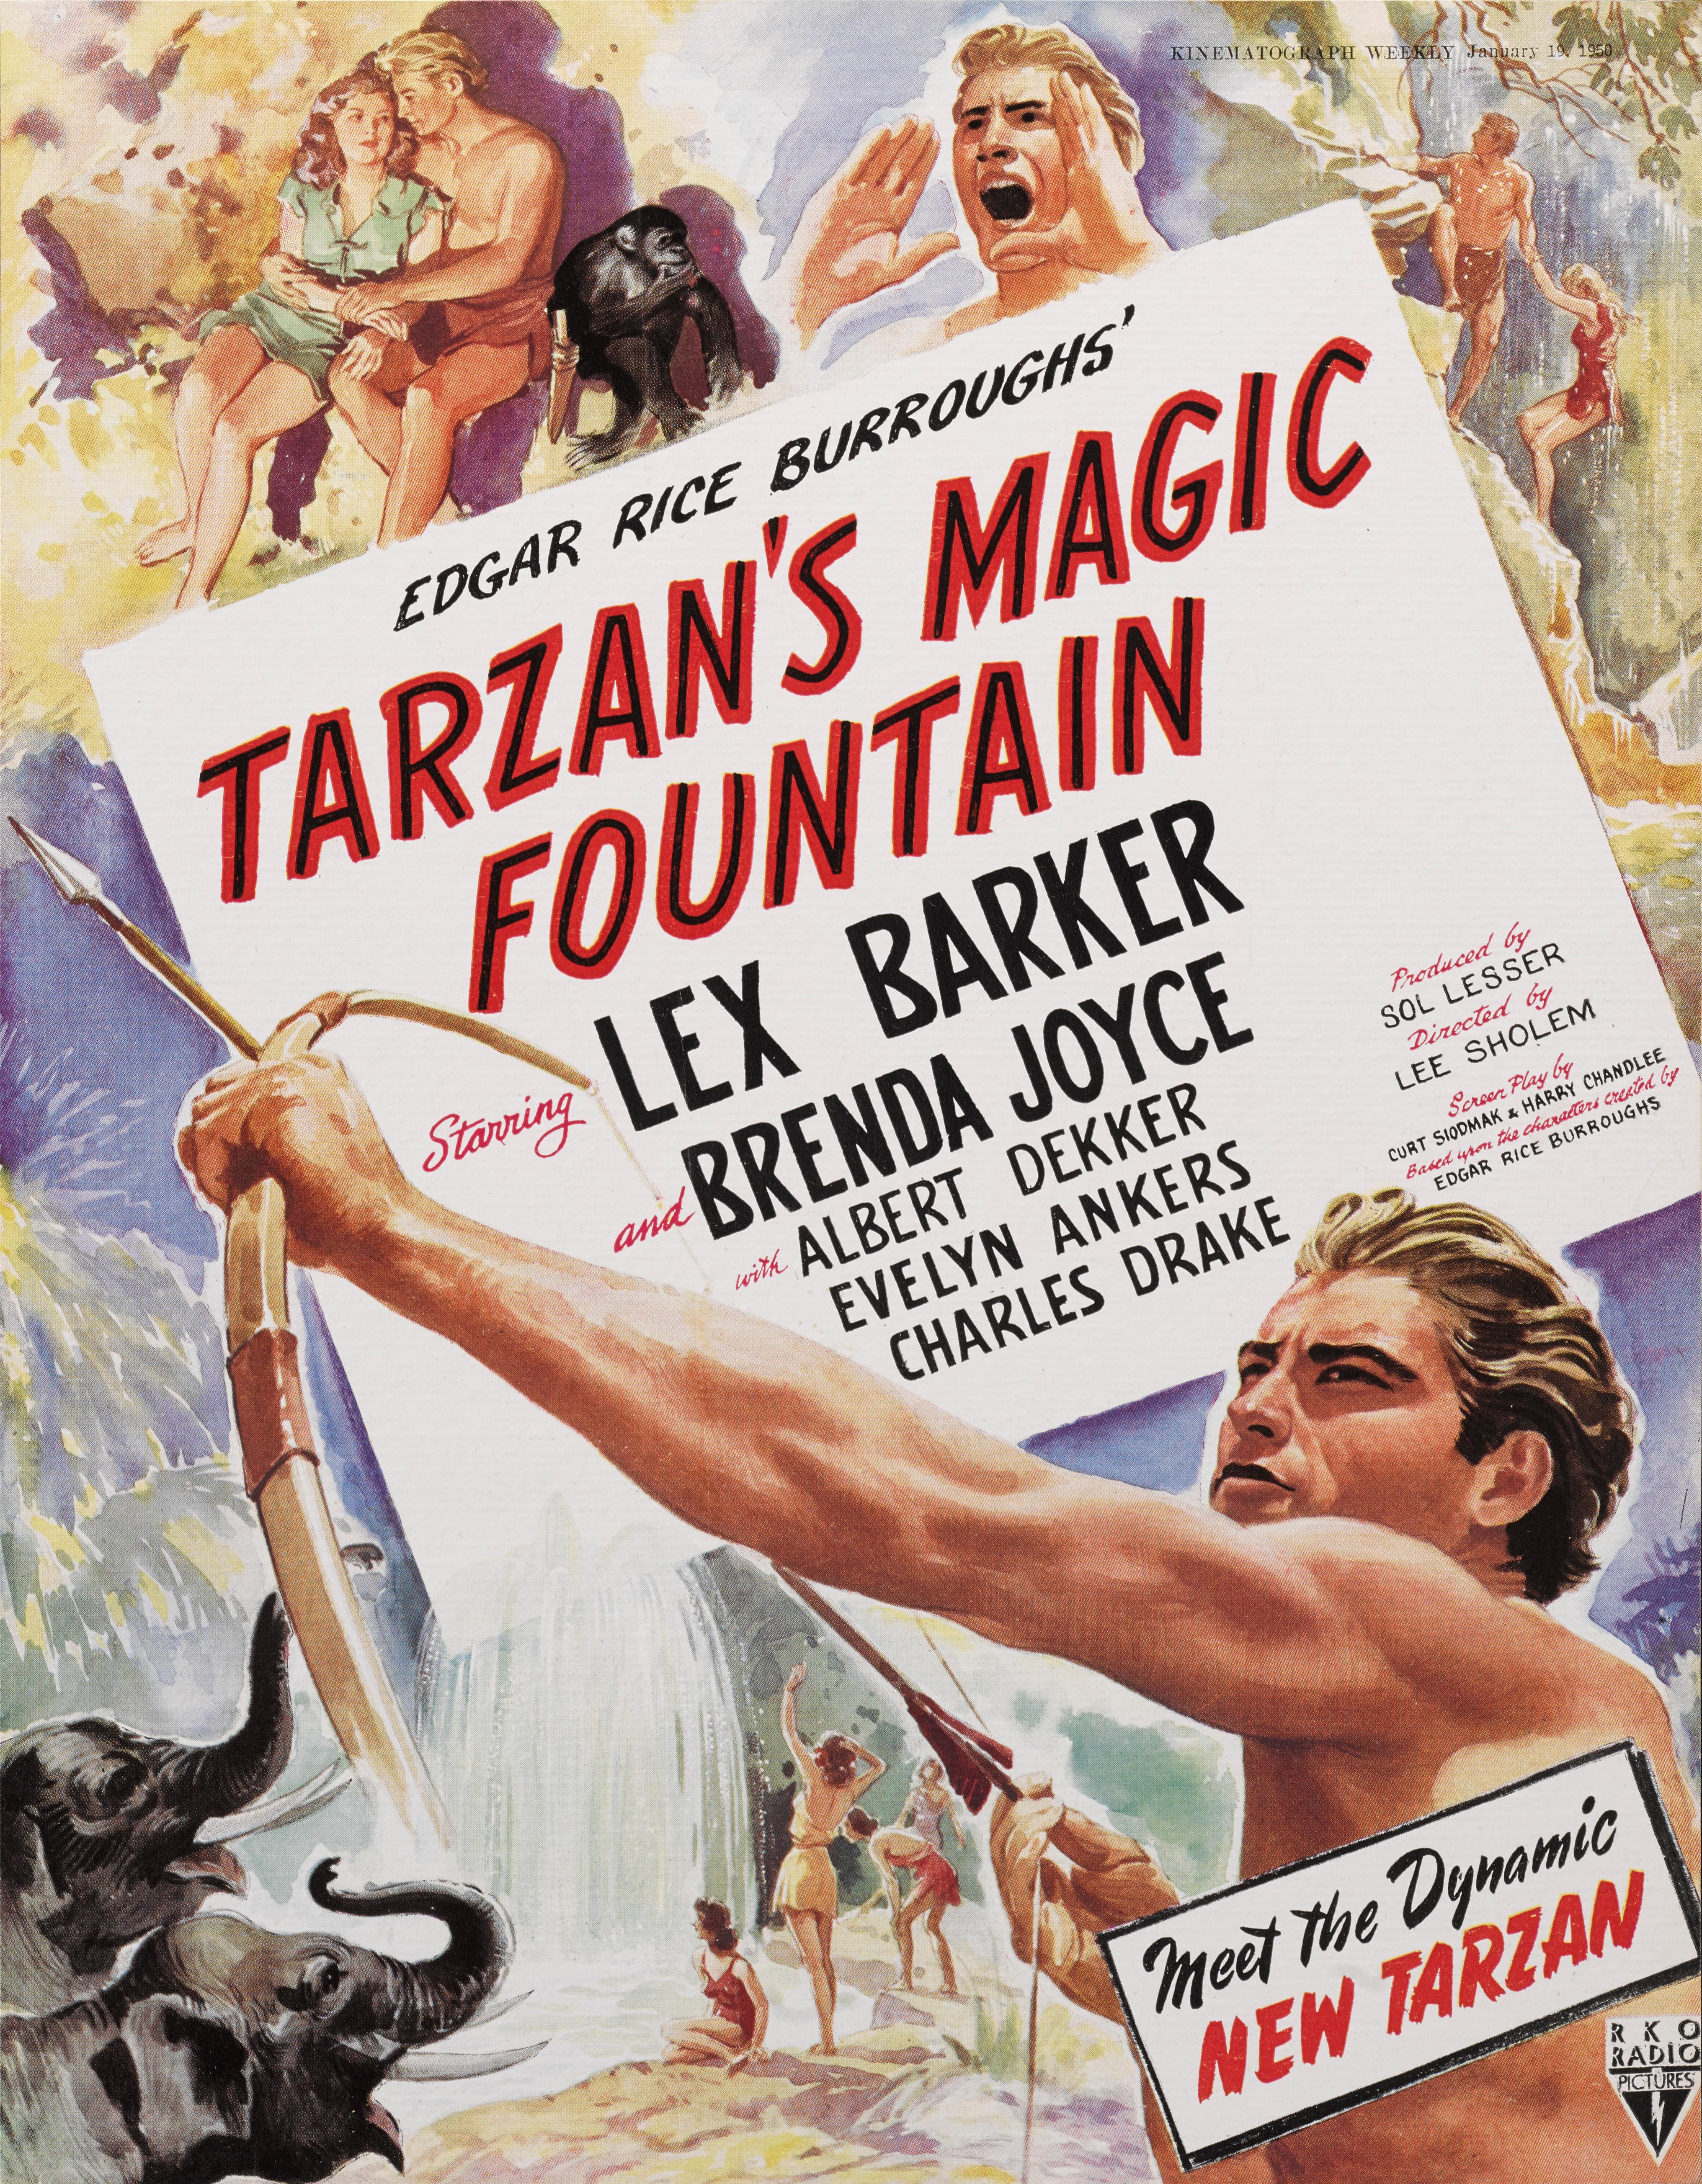 Original British trade advertisement for the 1949 adventure, fantasy science film Tarzan's Magic Fountain.
The film was directed by Lee Sholem and starred Lex Barker, Brenda Joyce, Albert Dekker
The piece is conservation paper backed and would be